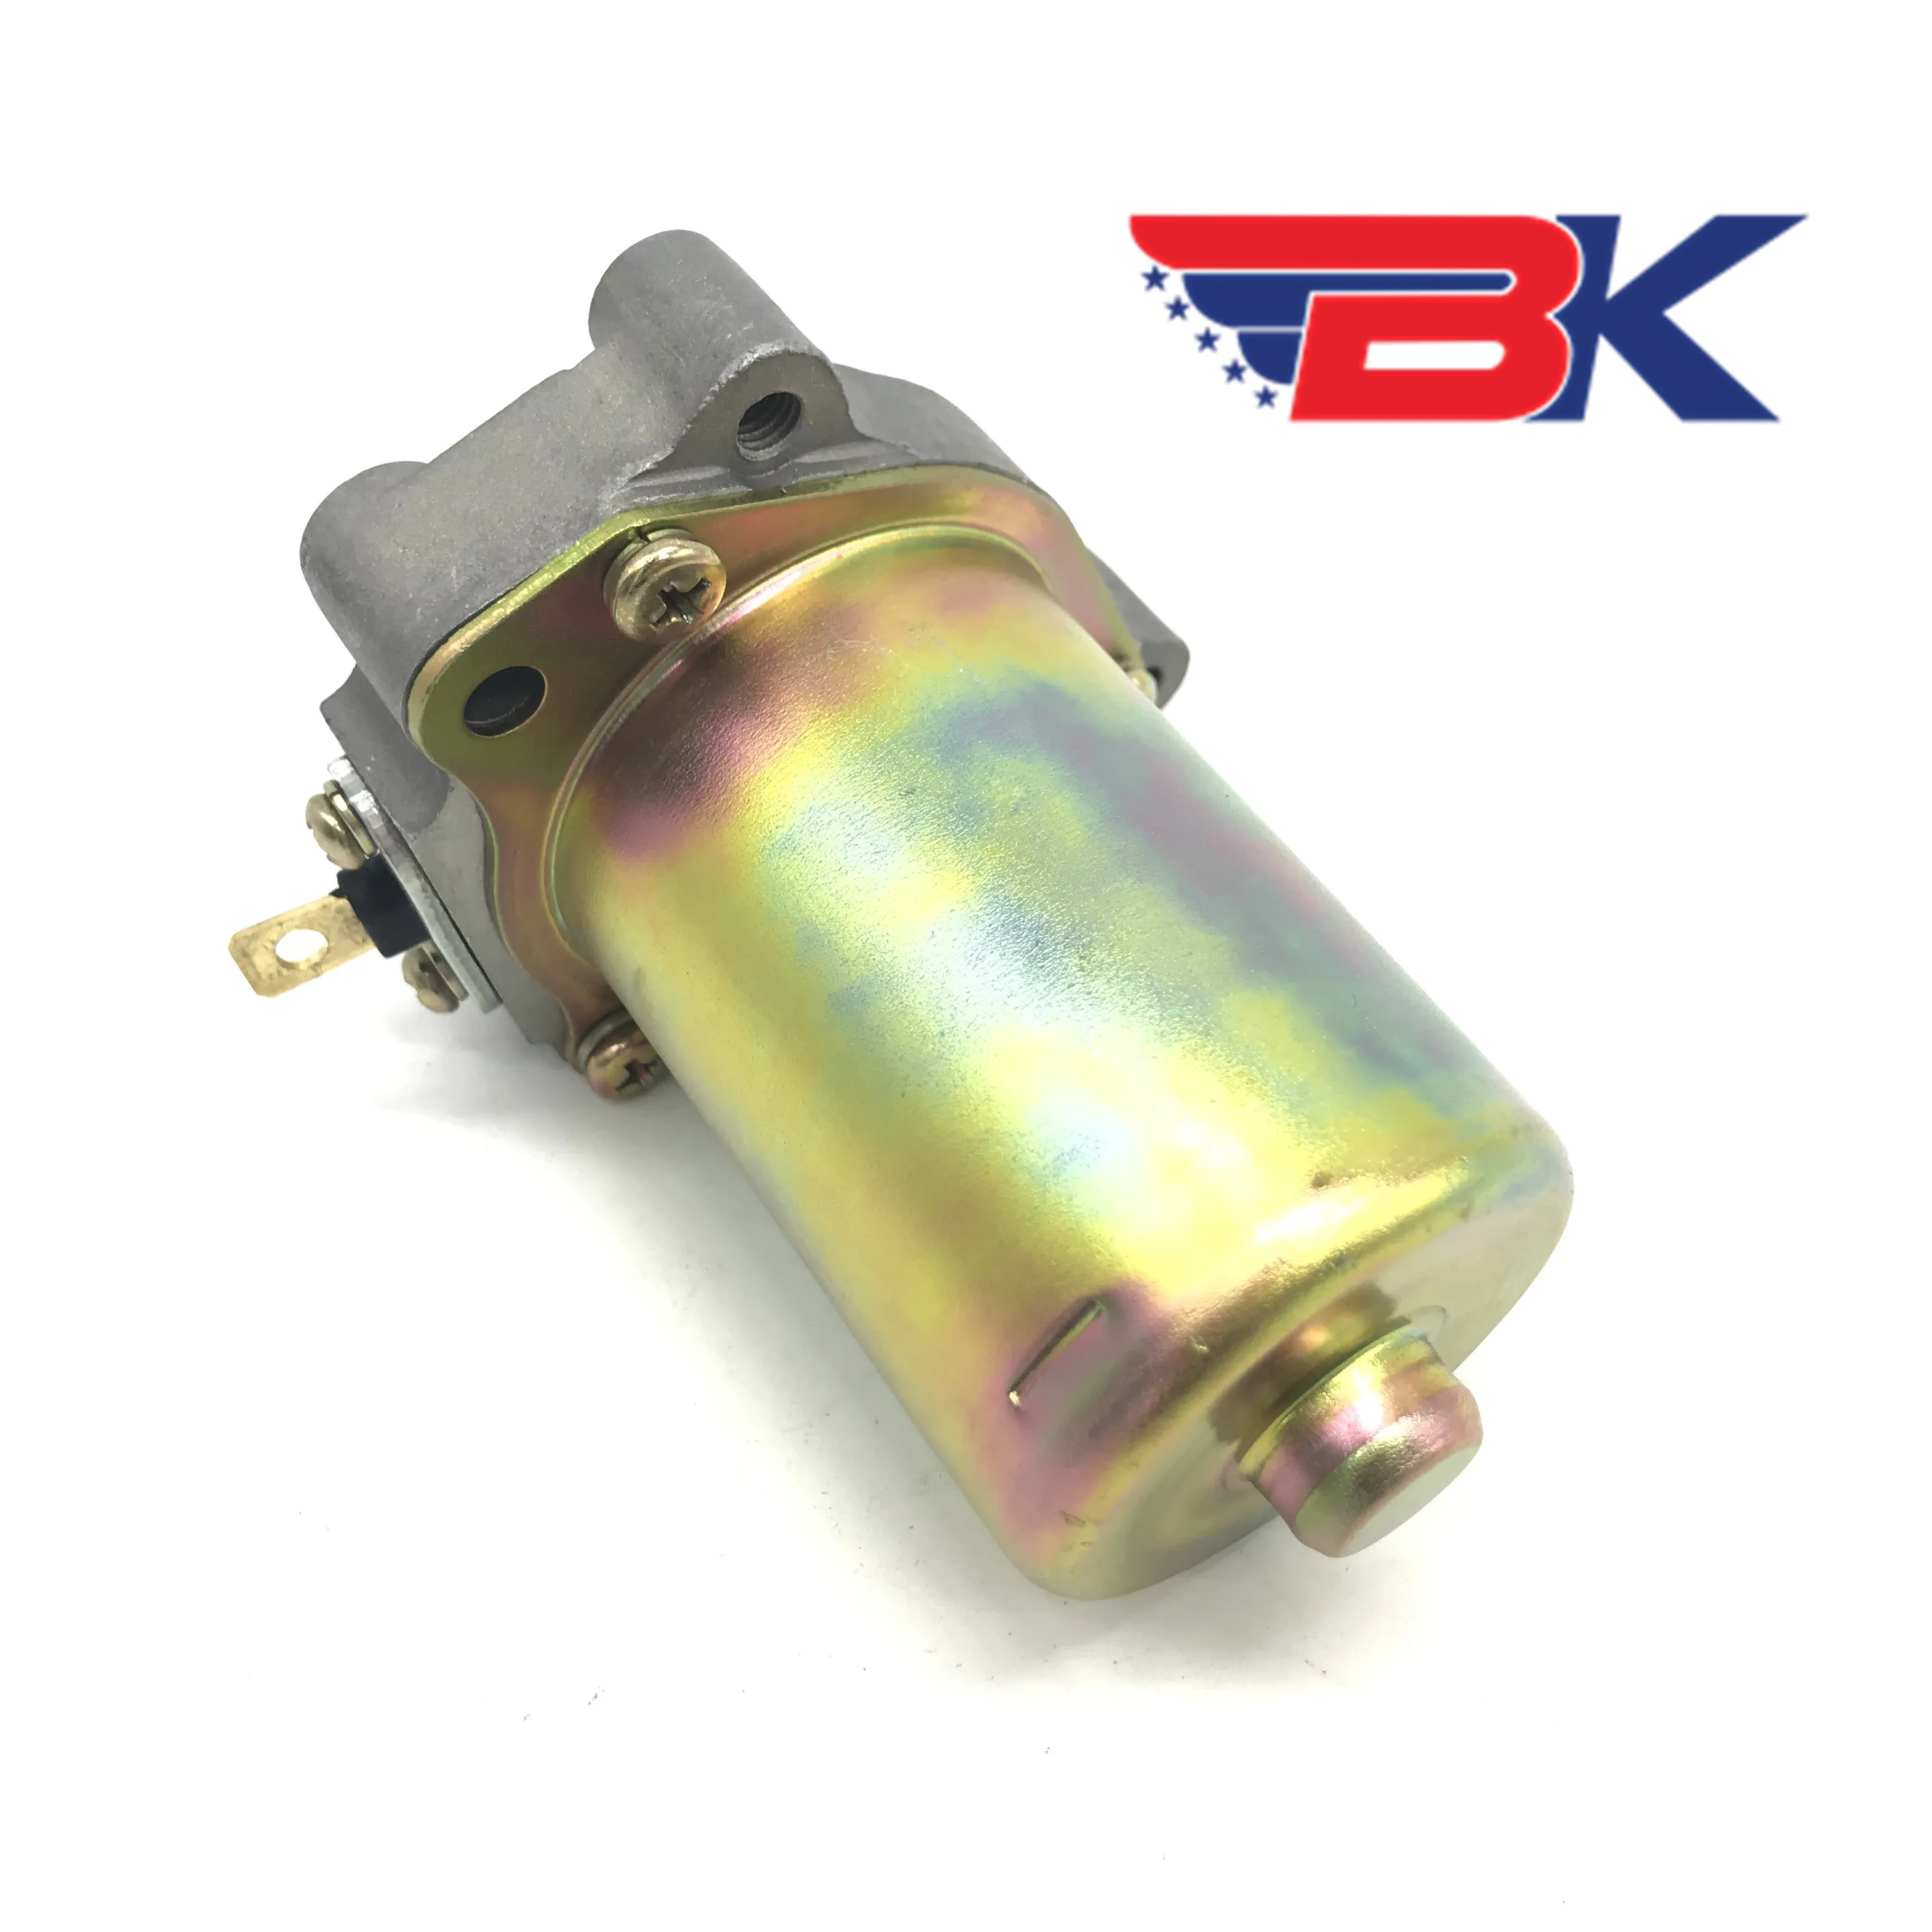 STARTER MOTOR FOR APRILIA RS125 RS 125 122 ROTAX 1996-2009 rotate direction CW